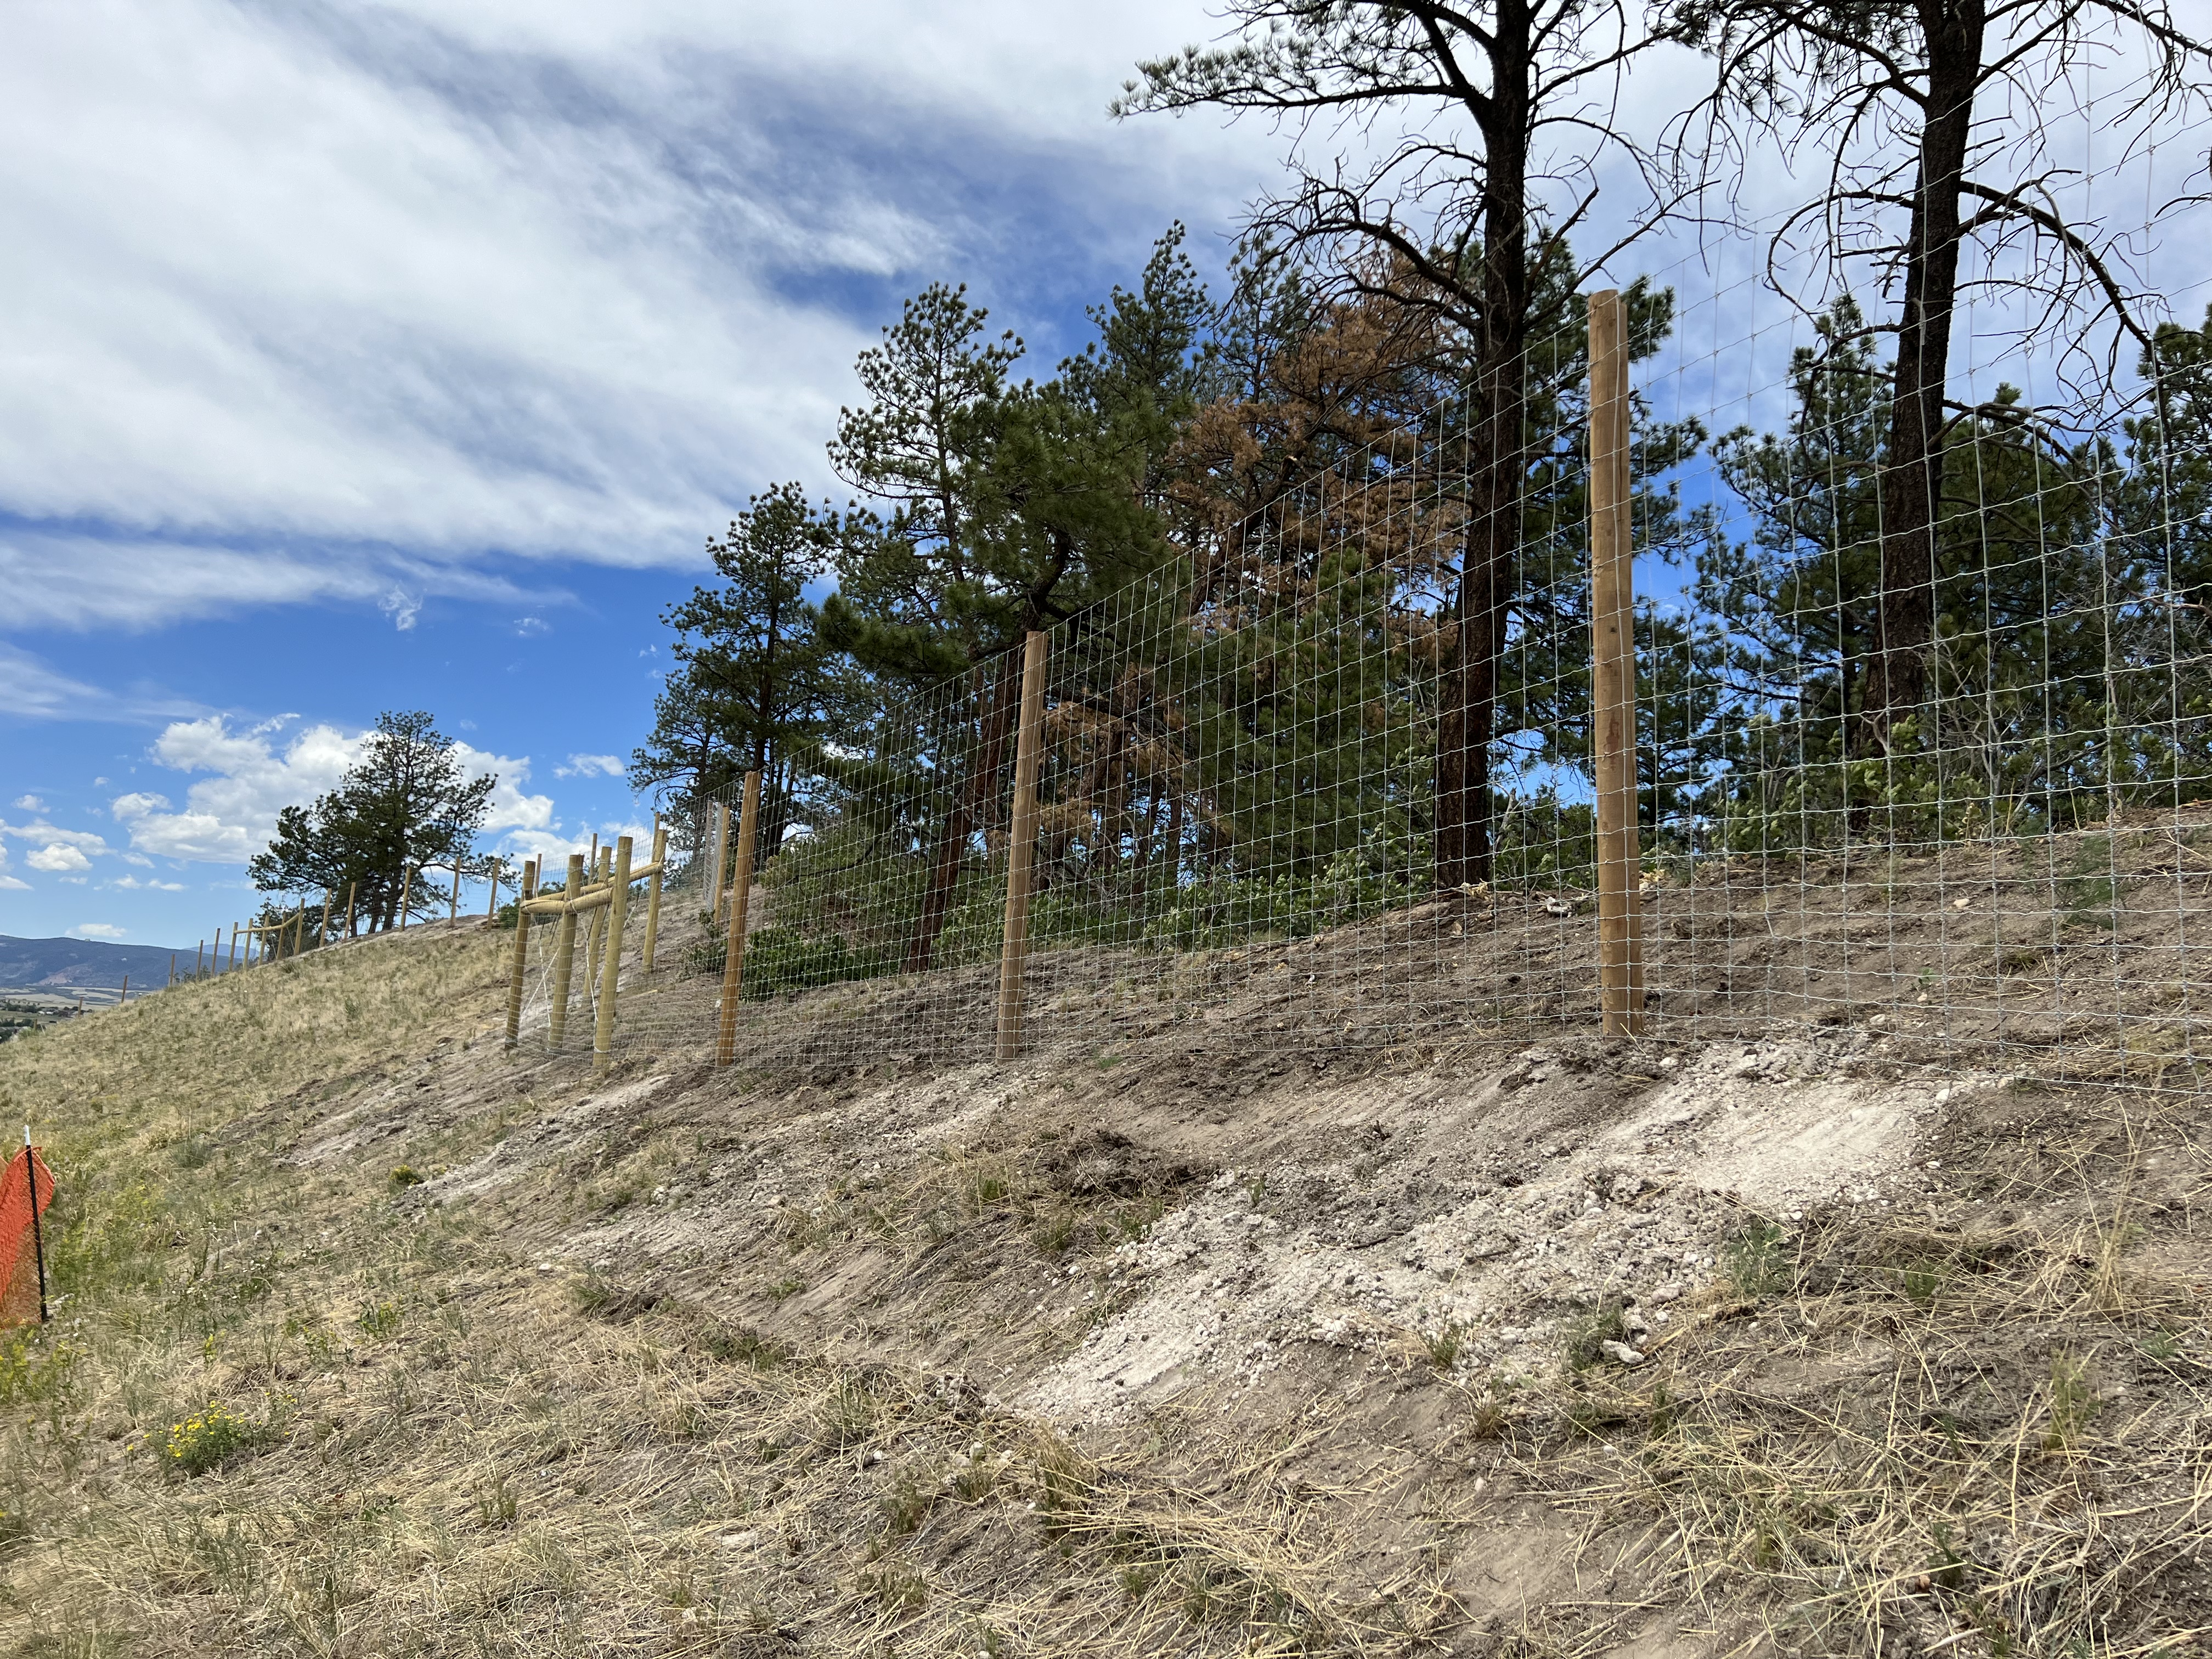 Wildlife fencing continues to go up along the west side of I-25 near Happy Canyon Road. detail image